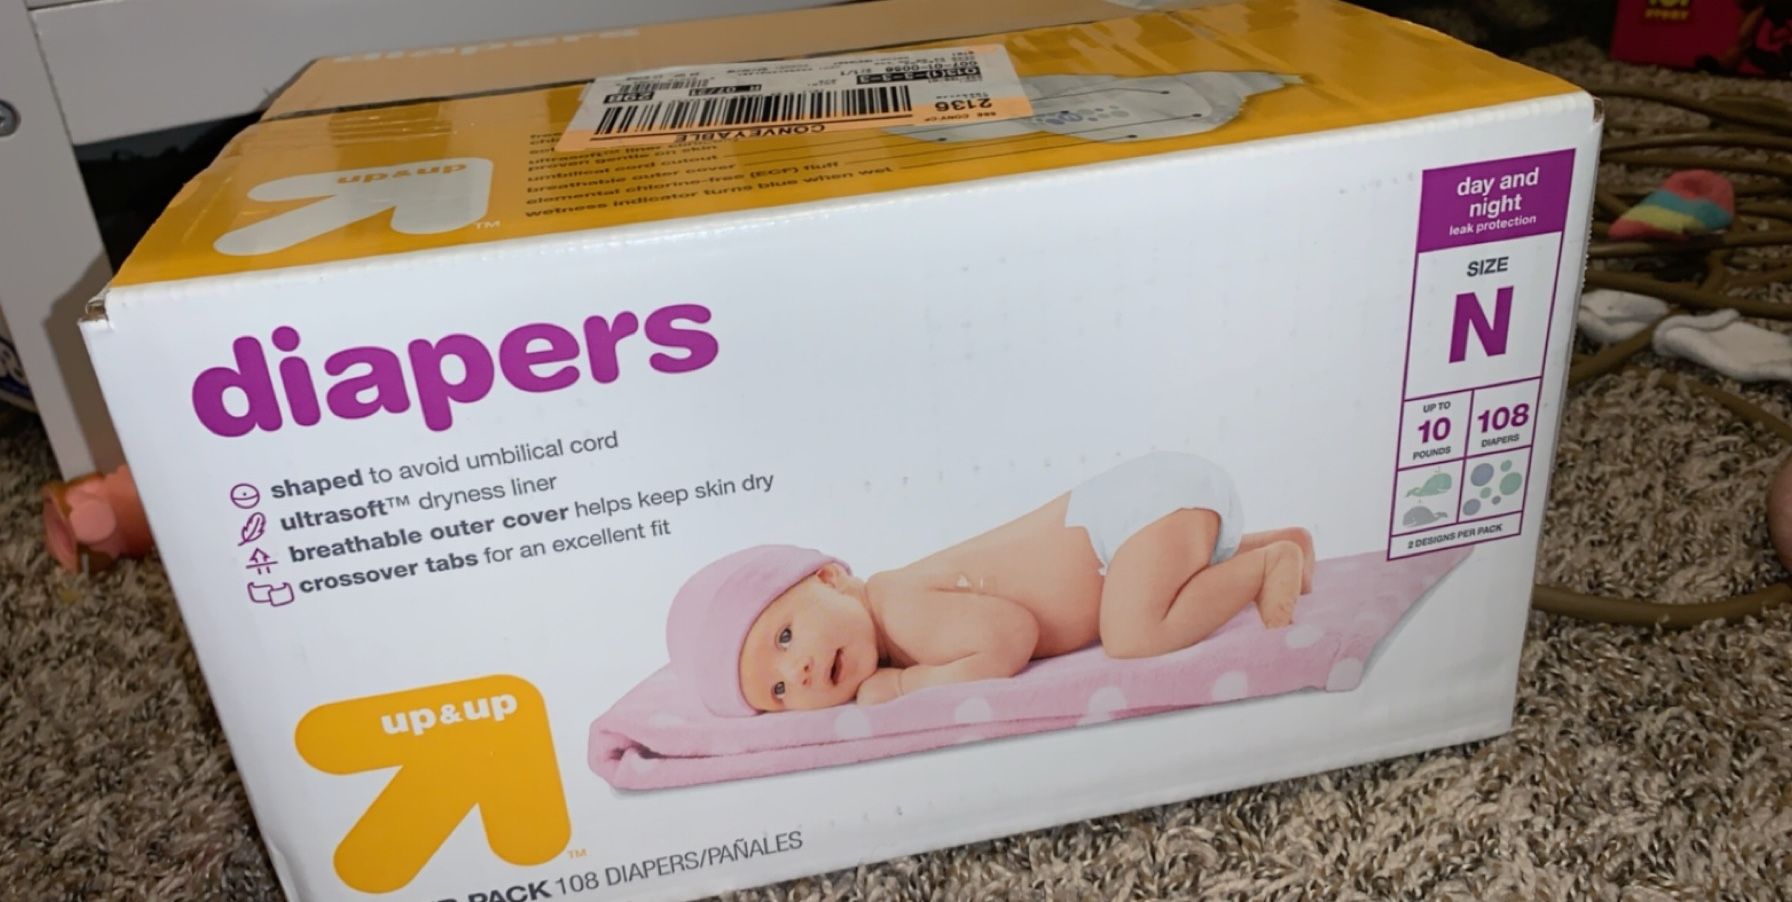 Up and up newborn diapers